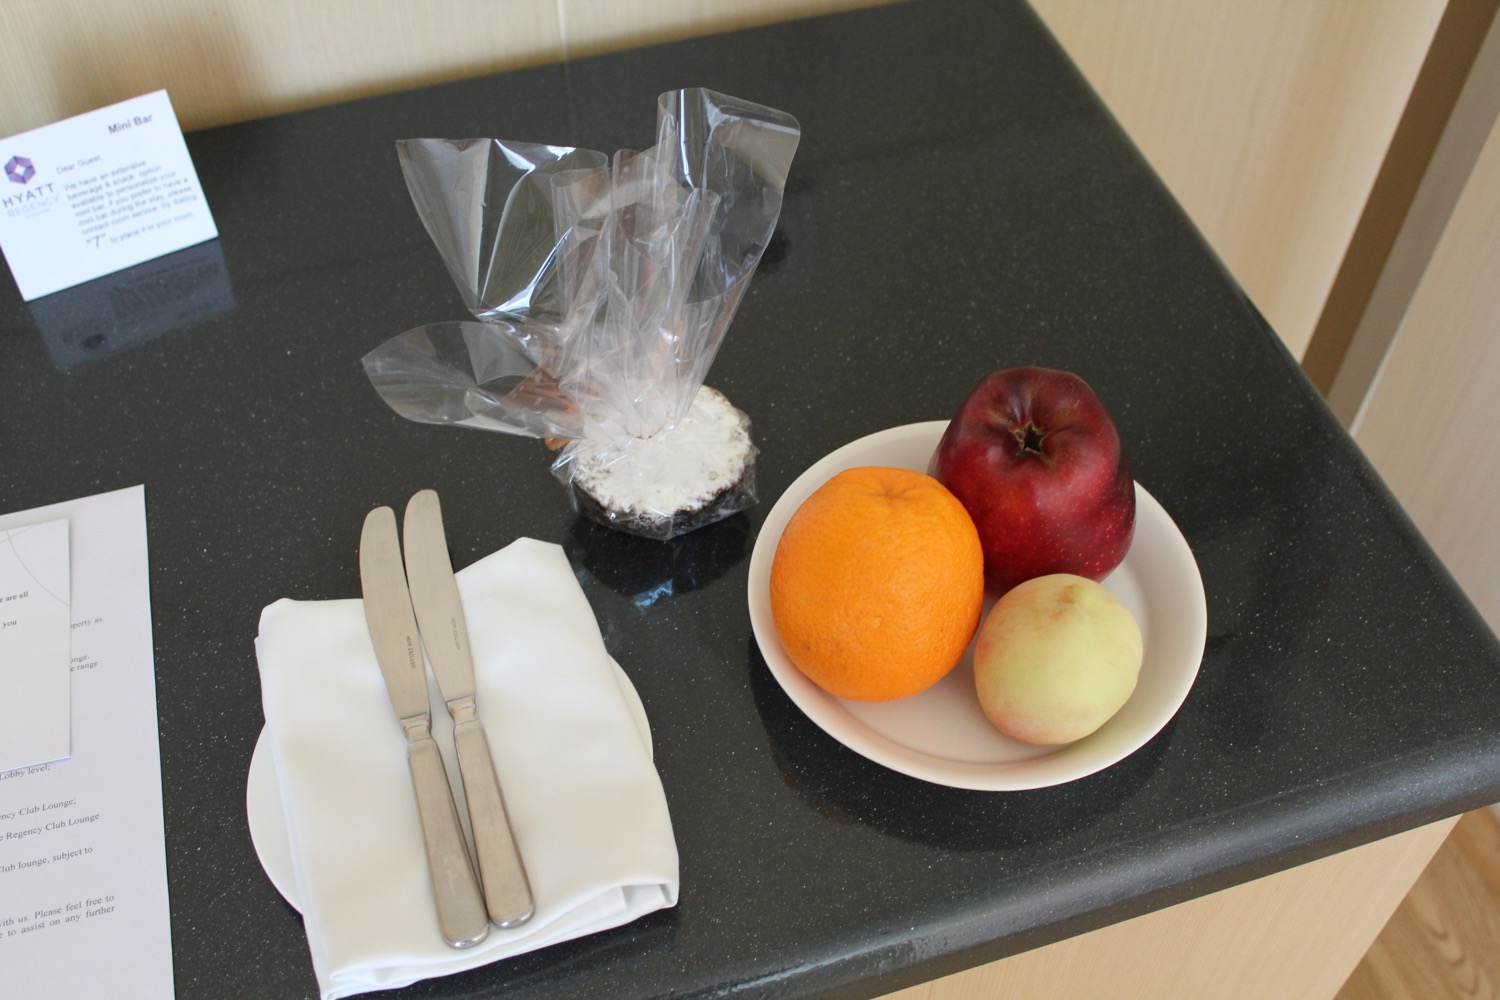 a plate of fruit and a napkin on a table